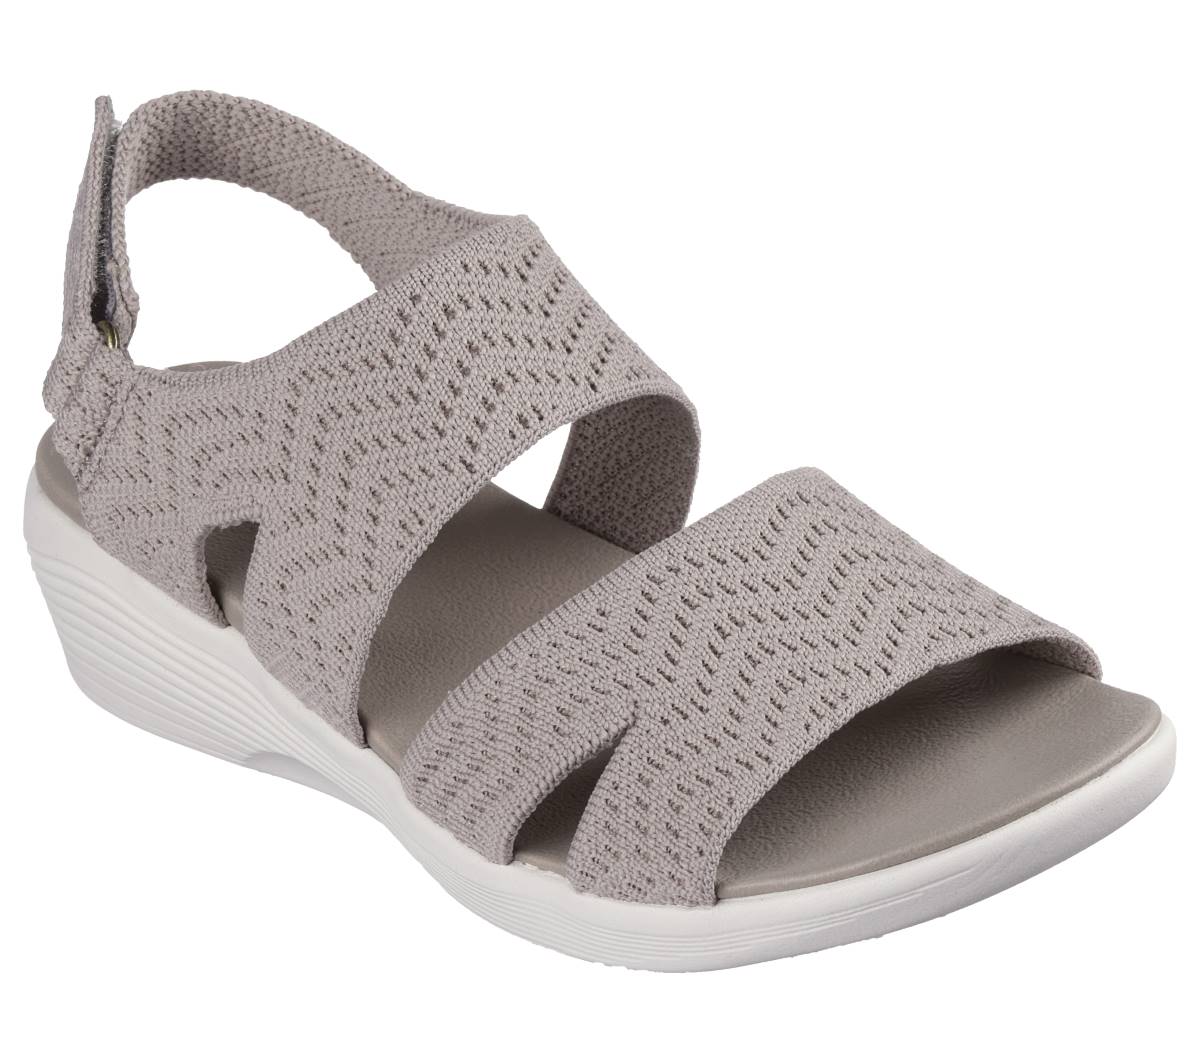 Skechers Arya Modern Muse TPE Taupe Womens Comfortable Sandals 163420 in a Plain Textile in Size 6